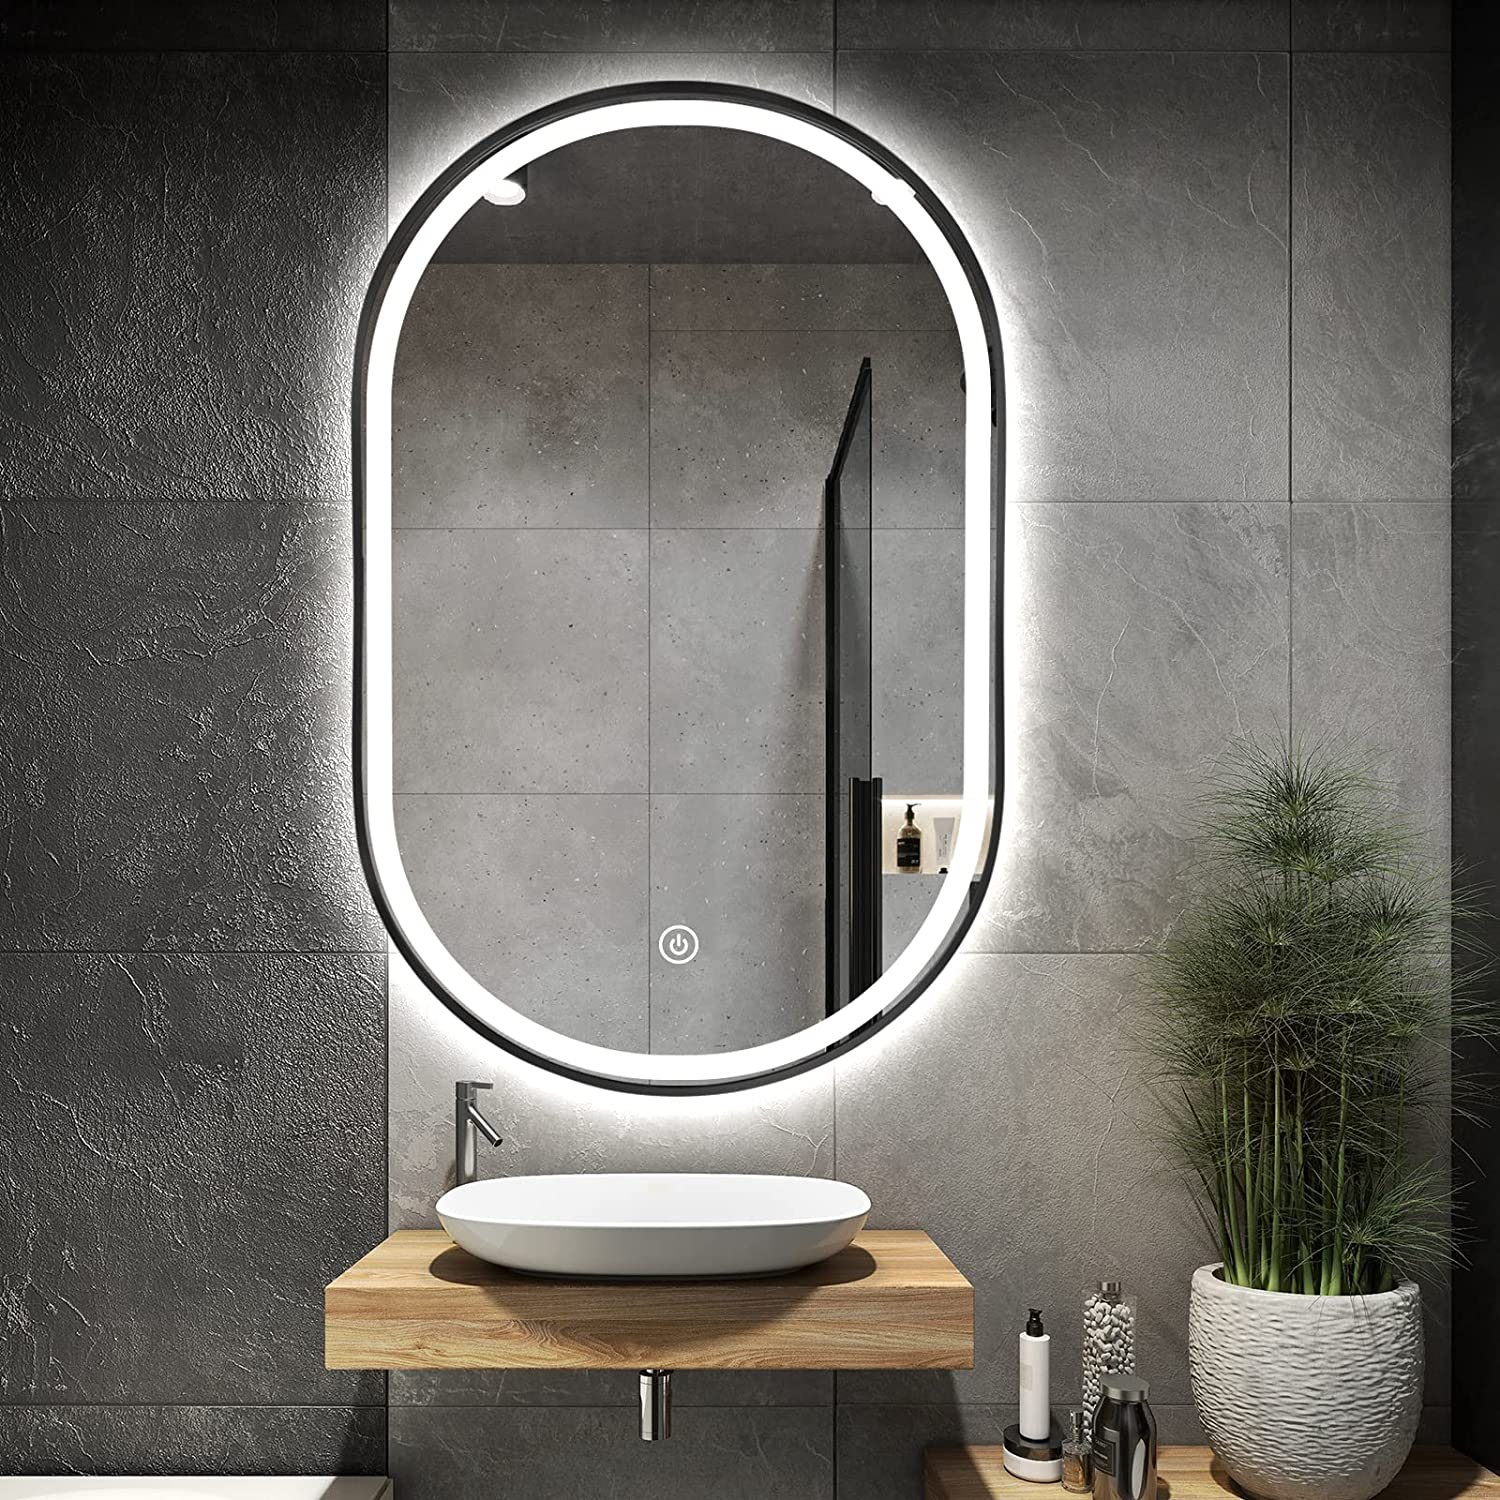 Reflect Your Beauty: Oval Mirror Designs for Every Room